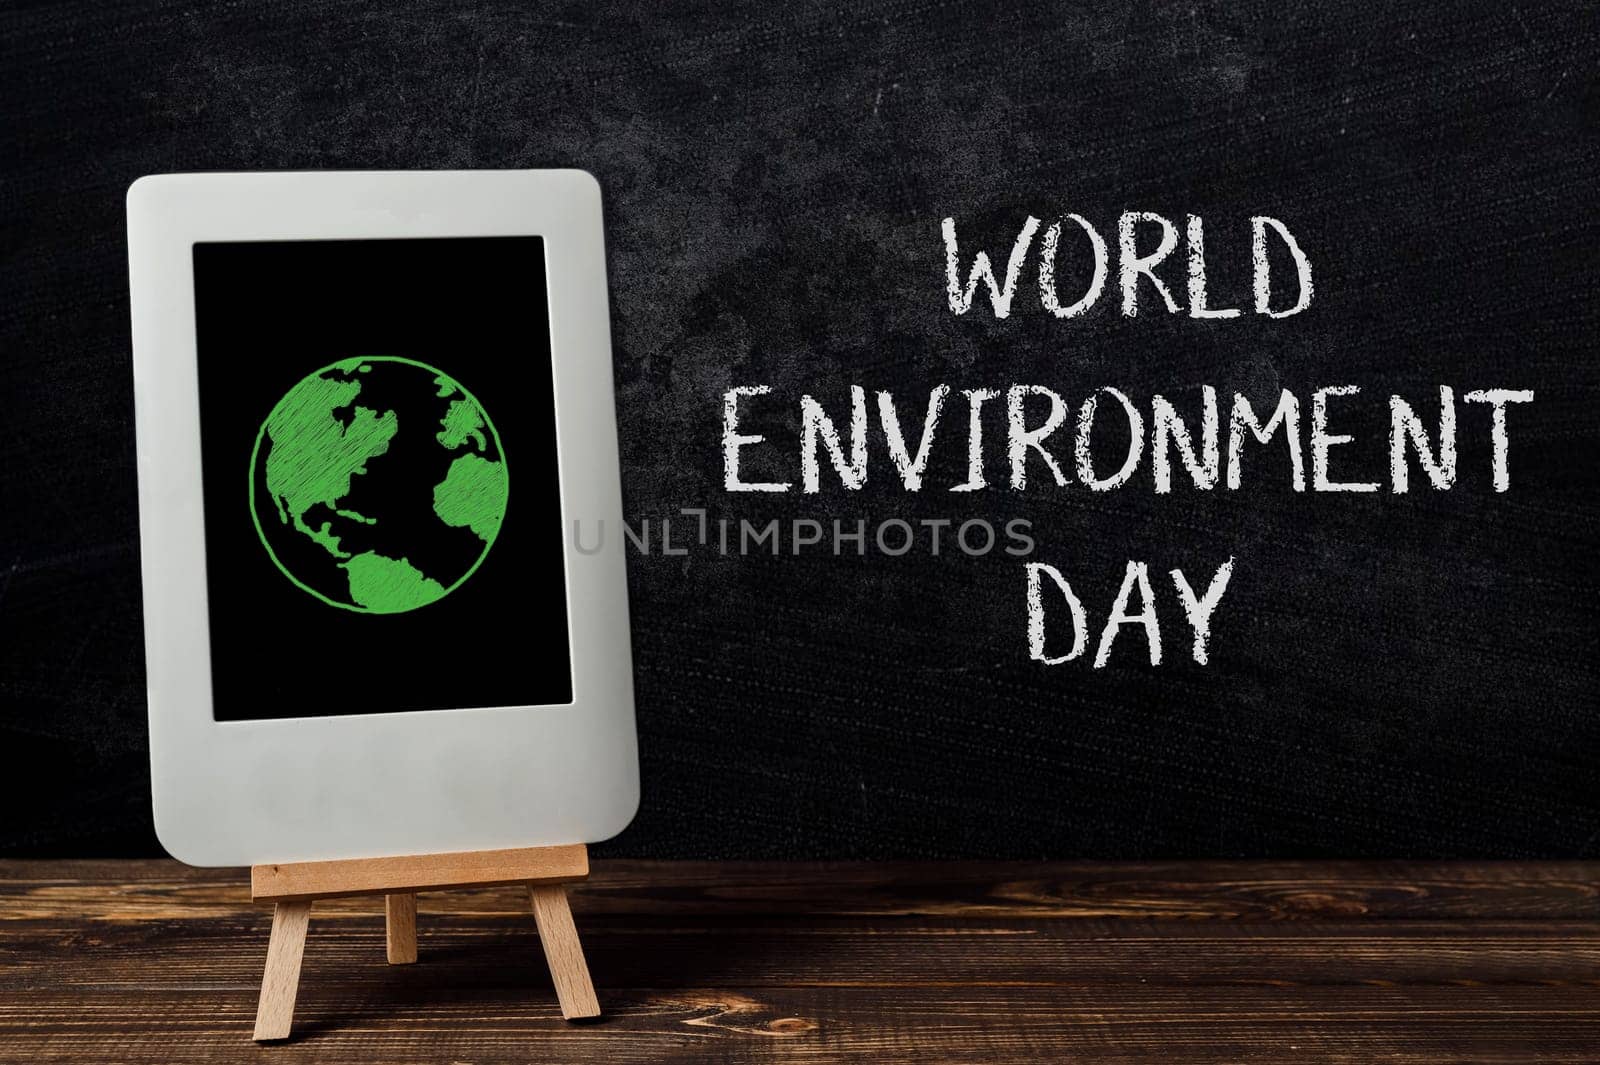 A white tablet displaying a green planet image rests on a wooden table, symbolizing environmental awareness and technology integration.